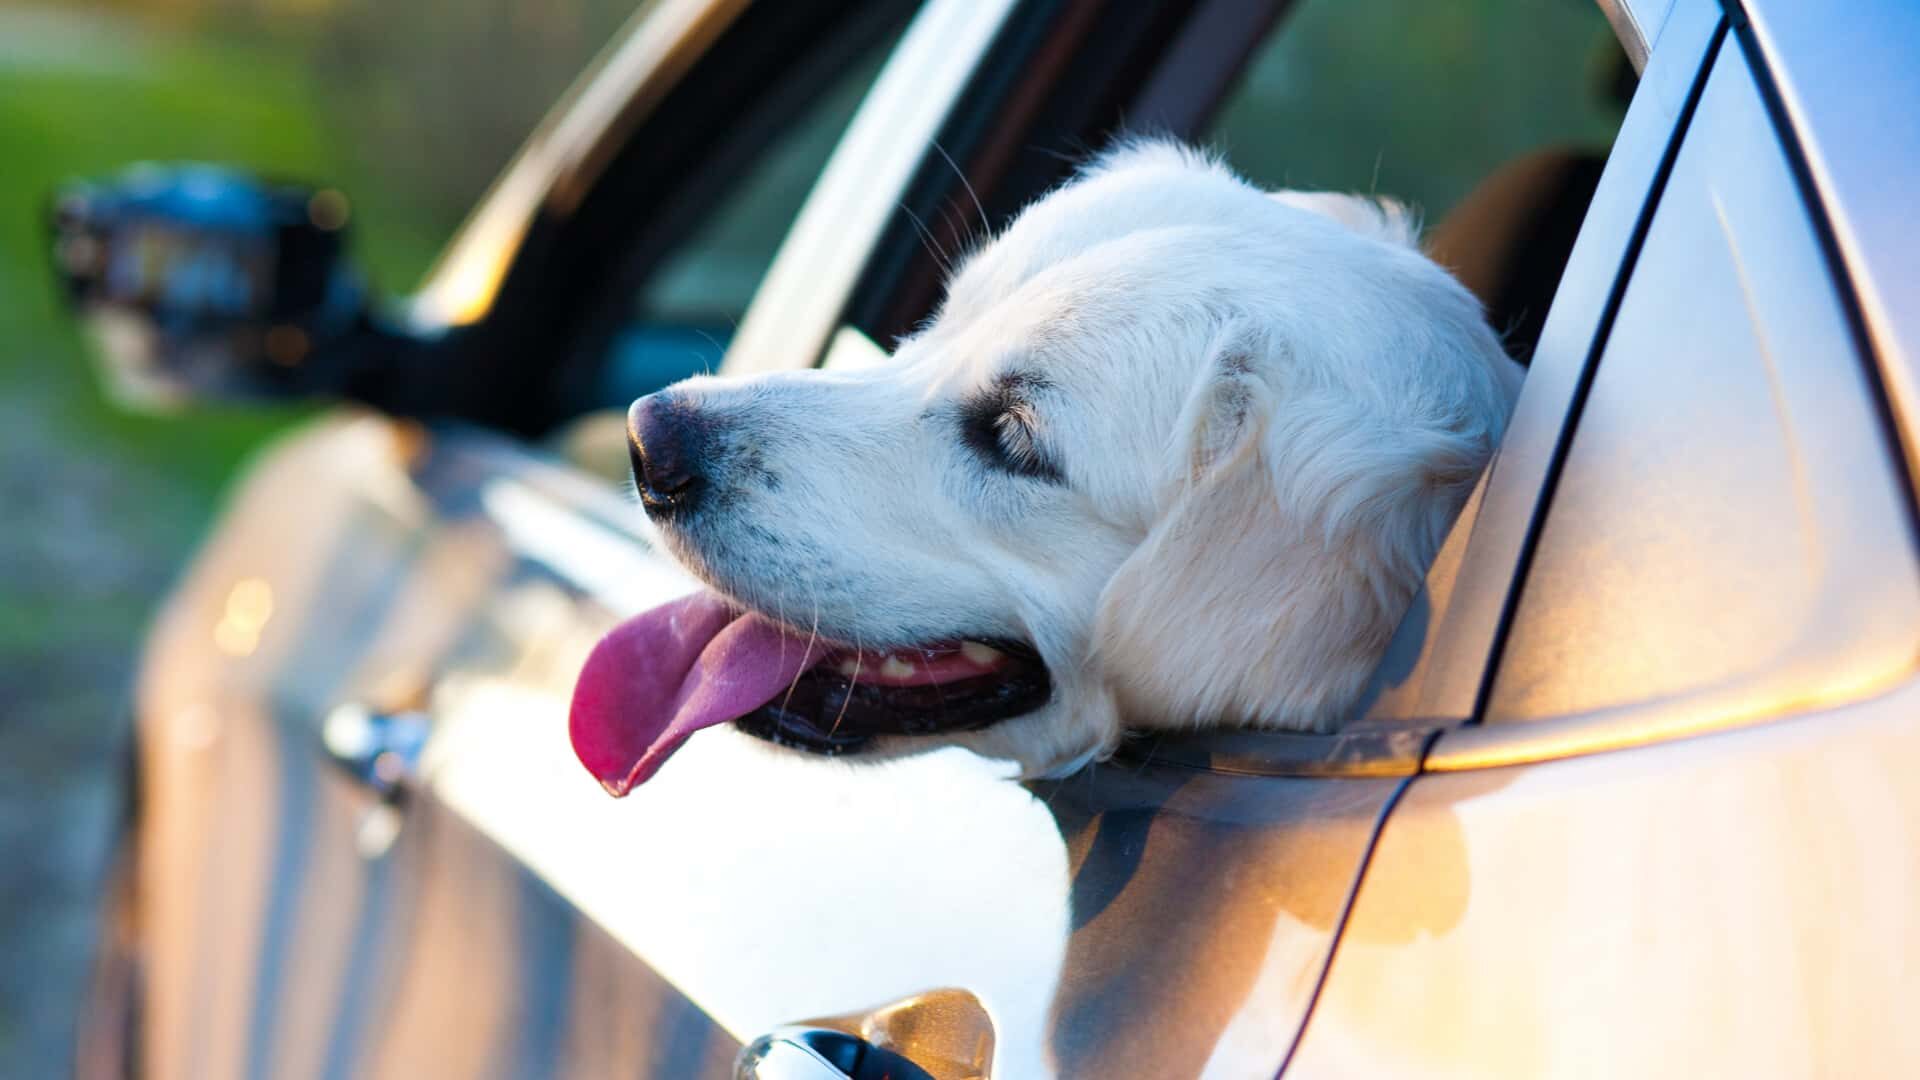 Why Does My Dog Whine While in the Car: Guide to Stop